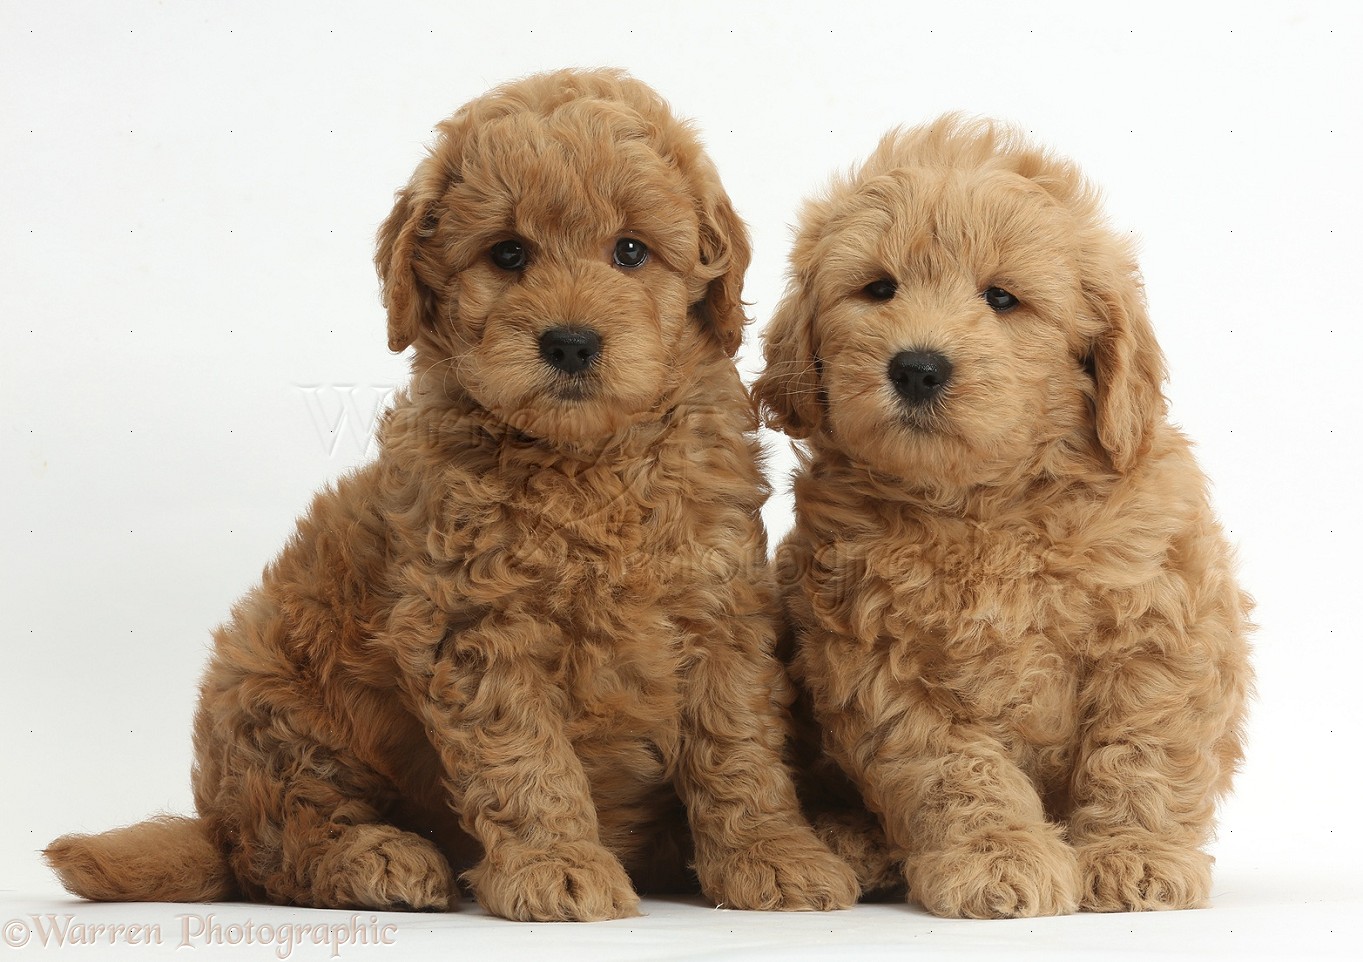 Dogs: Cute F1b Goldendoodle puppies photo WP37273